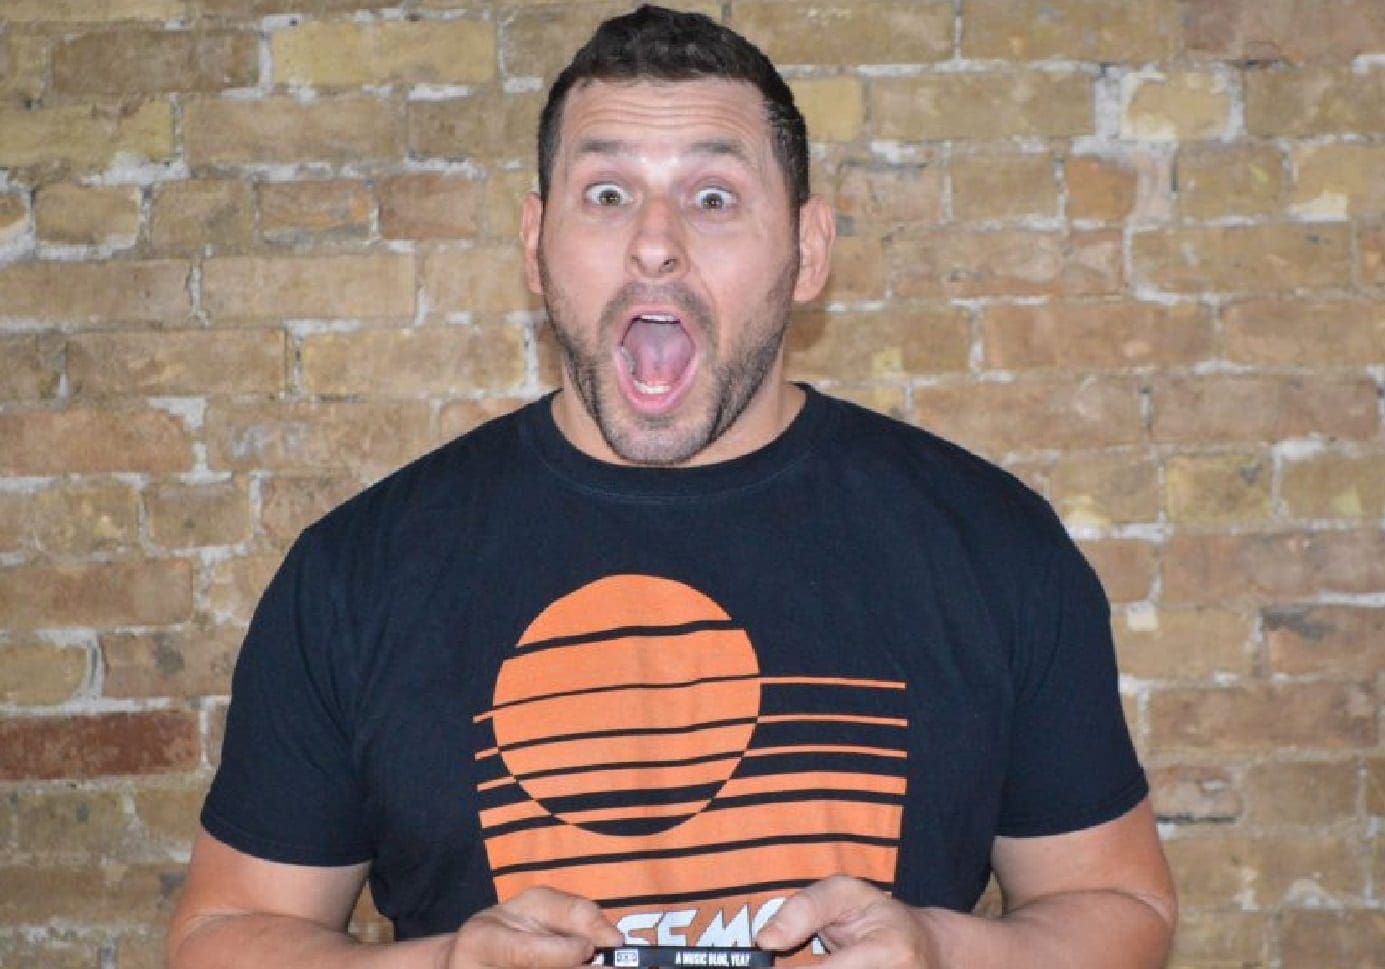 Colt Cabana’s Response To His Victory In Court